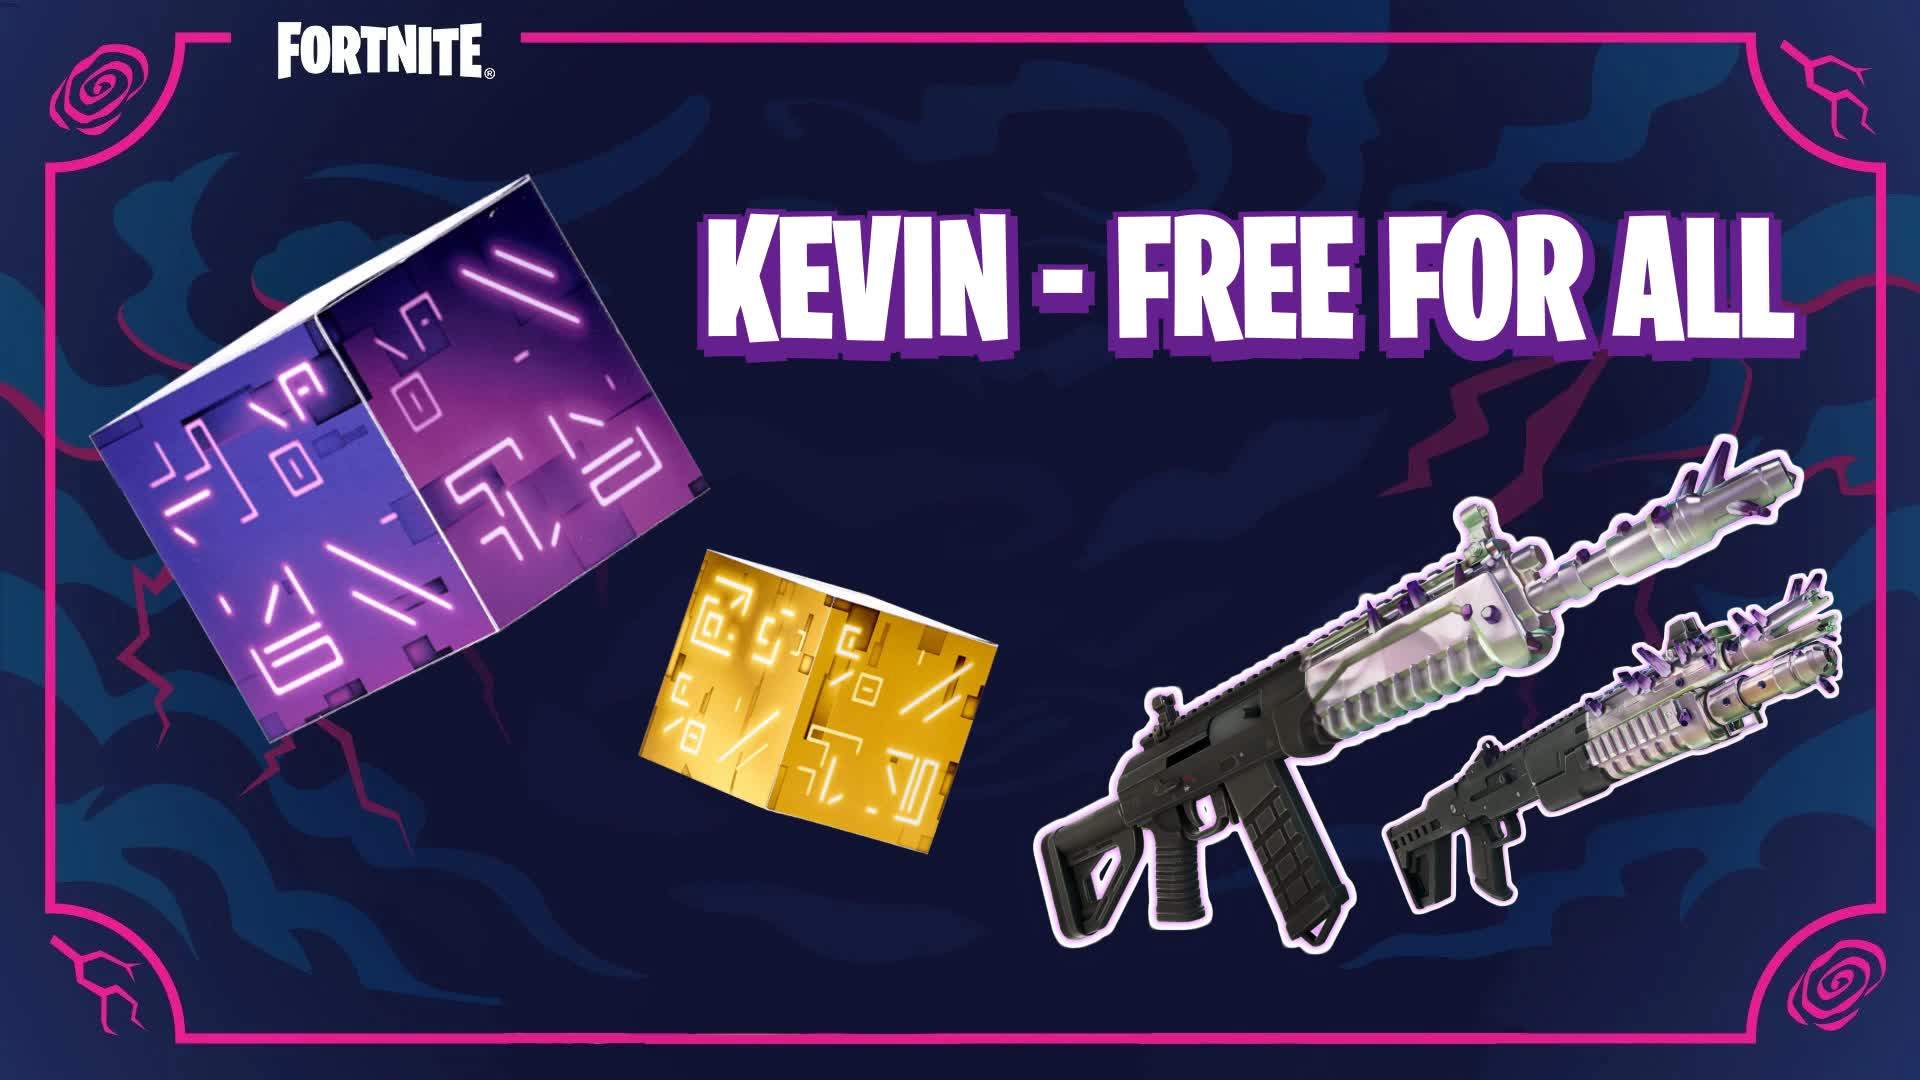 KEVIN - FREE FOR ALL